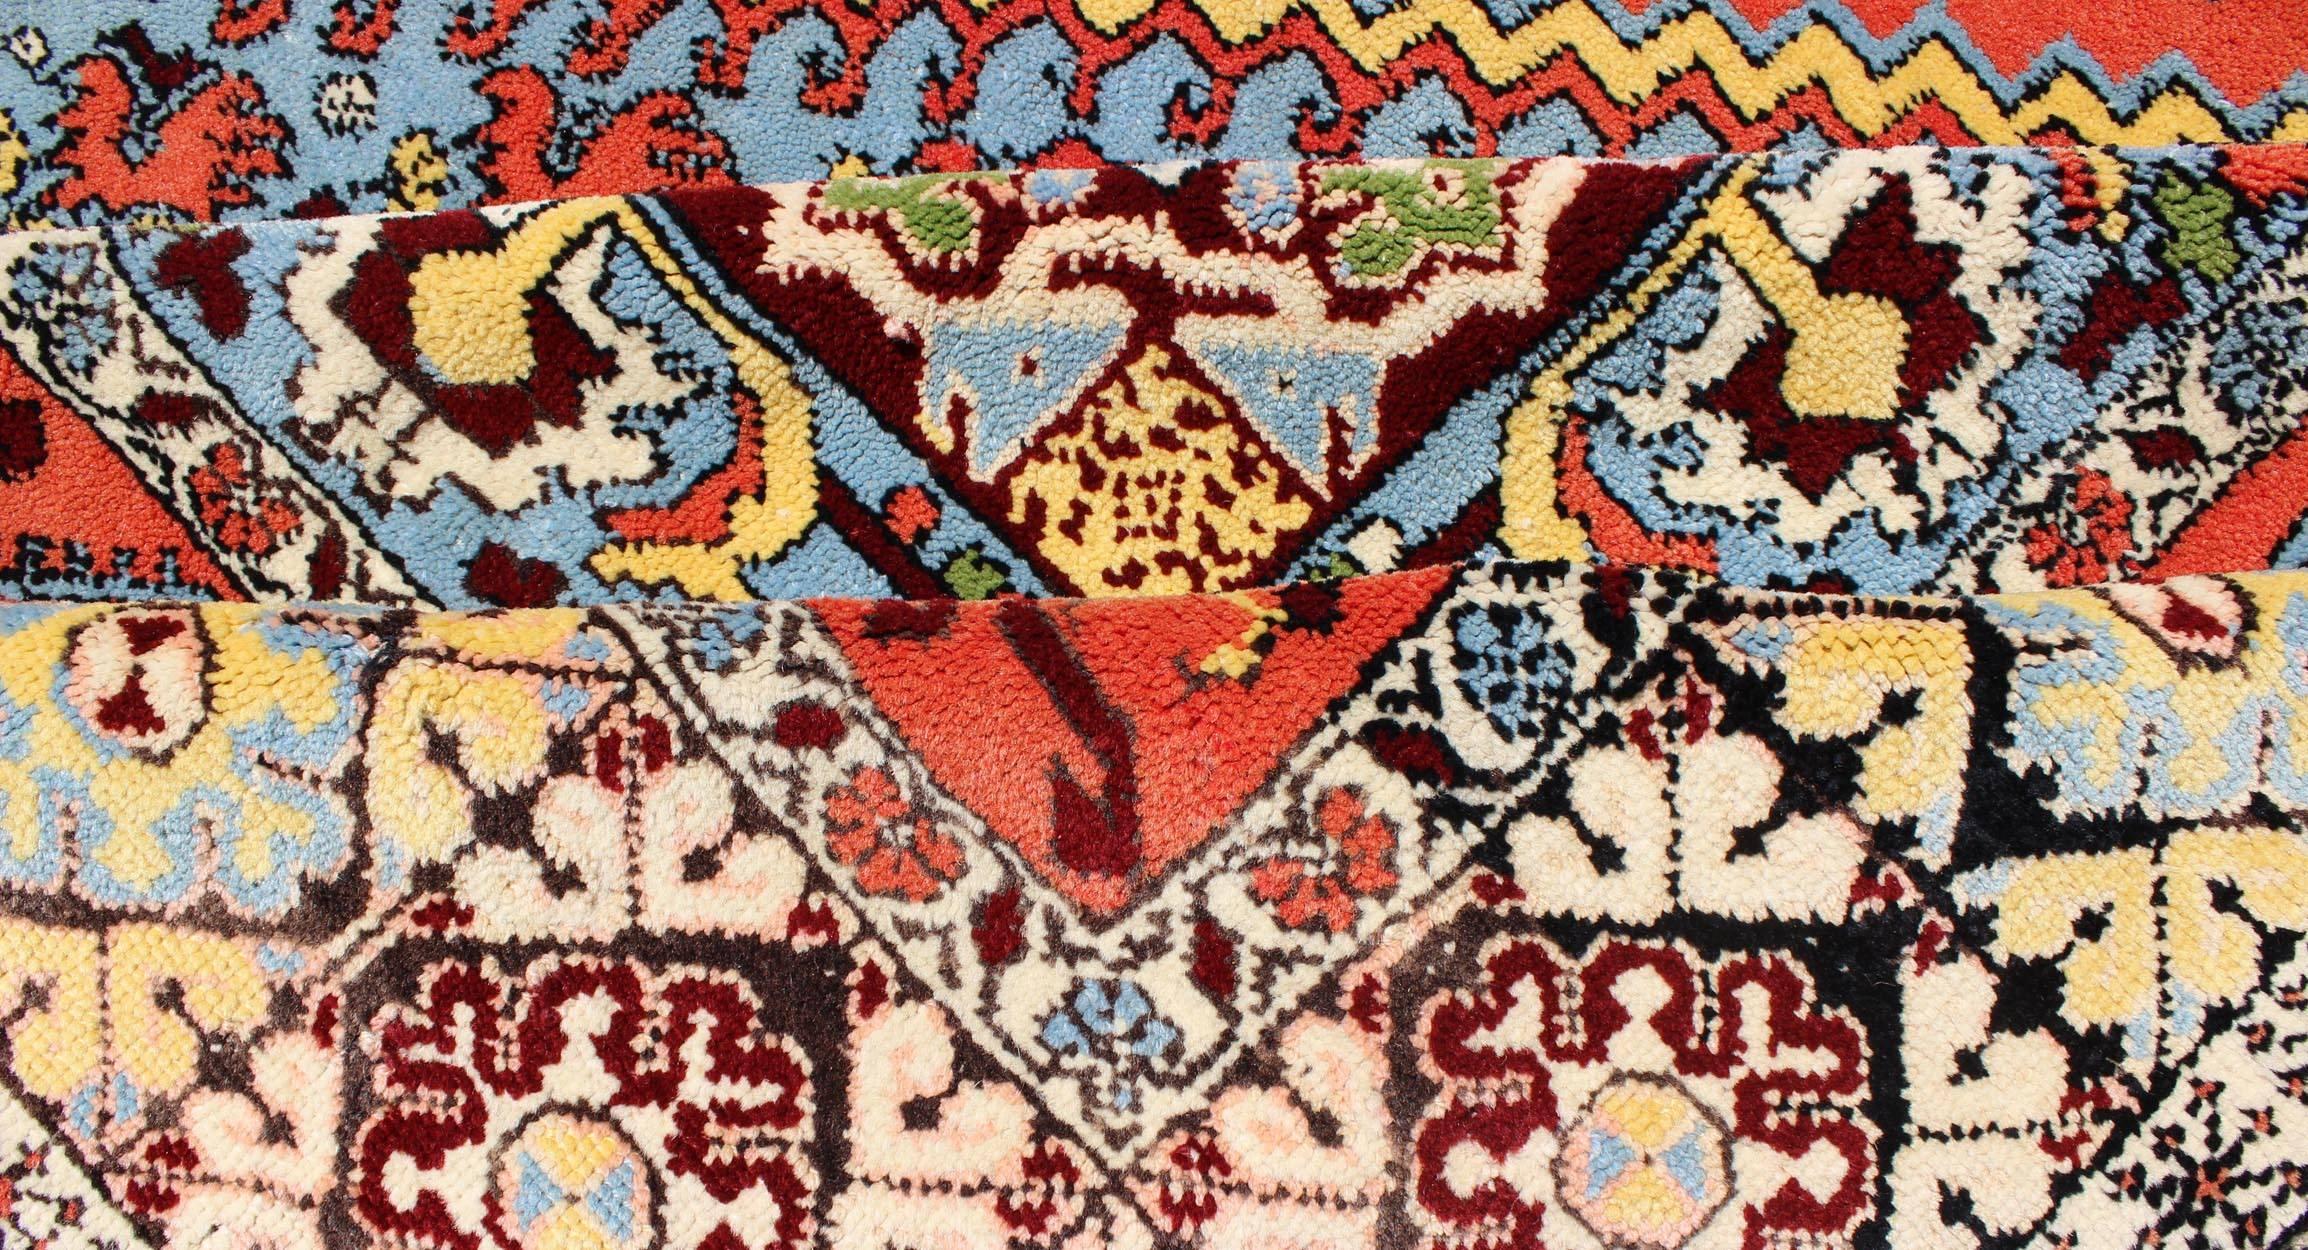 Hand-Knotted Large Colorful Vintage Moroccan Rug in Medallion Design and Tribal Elements